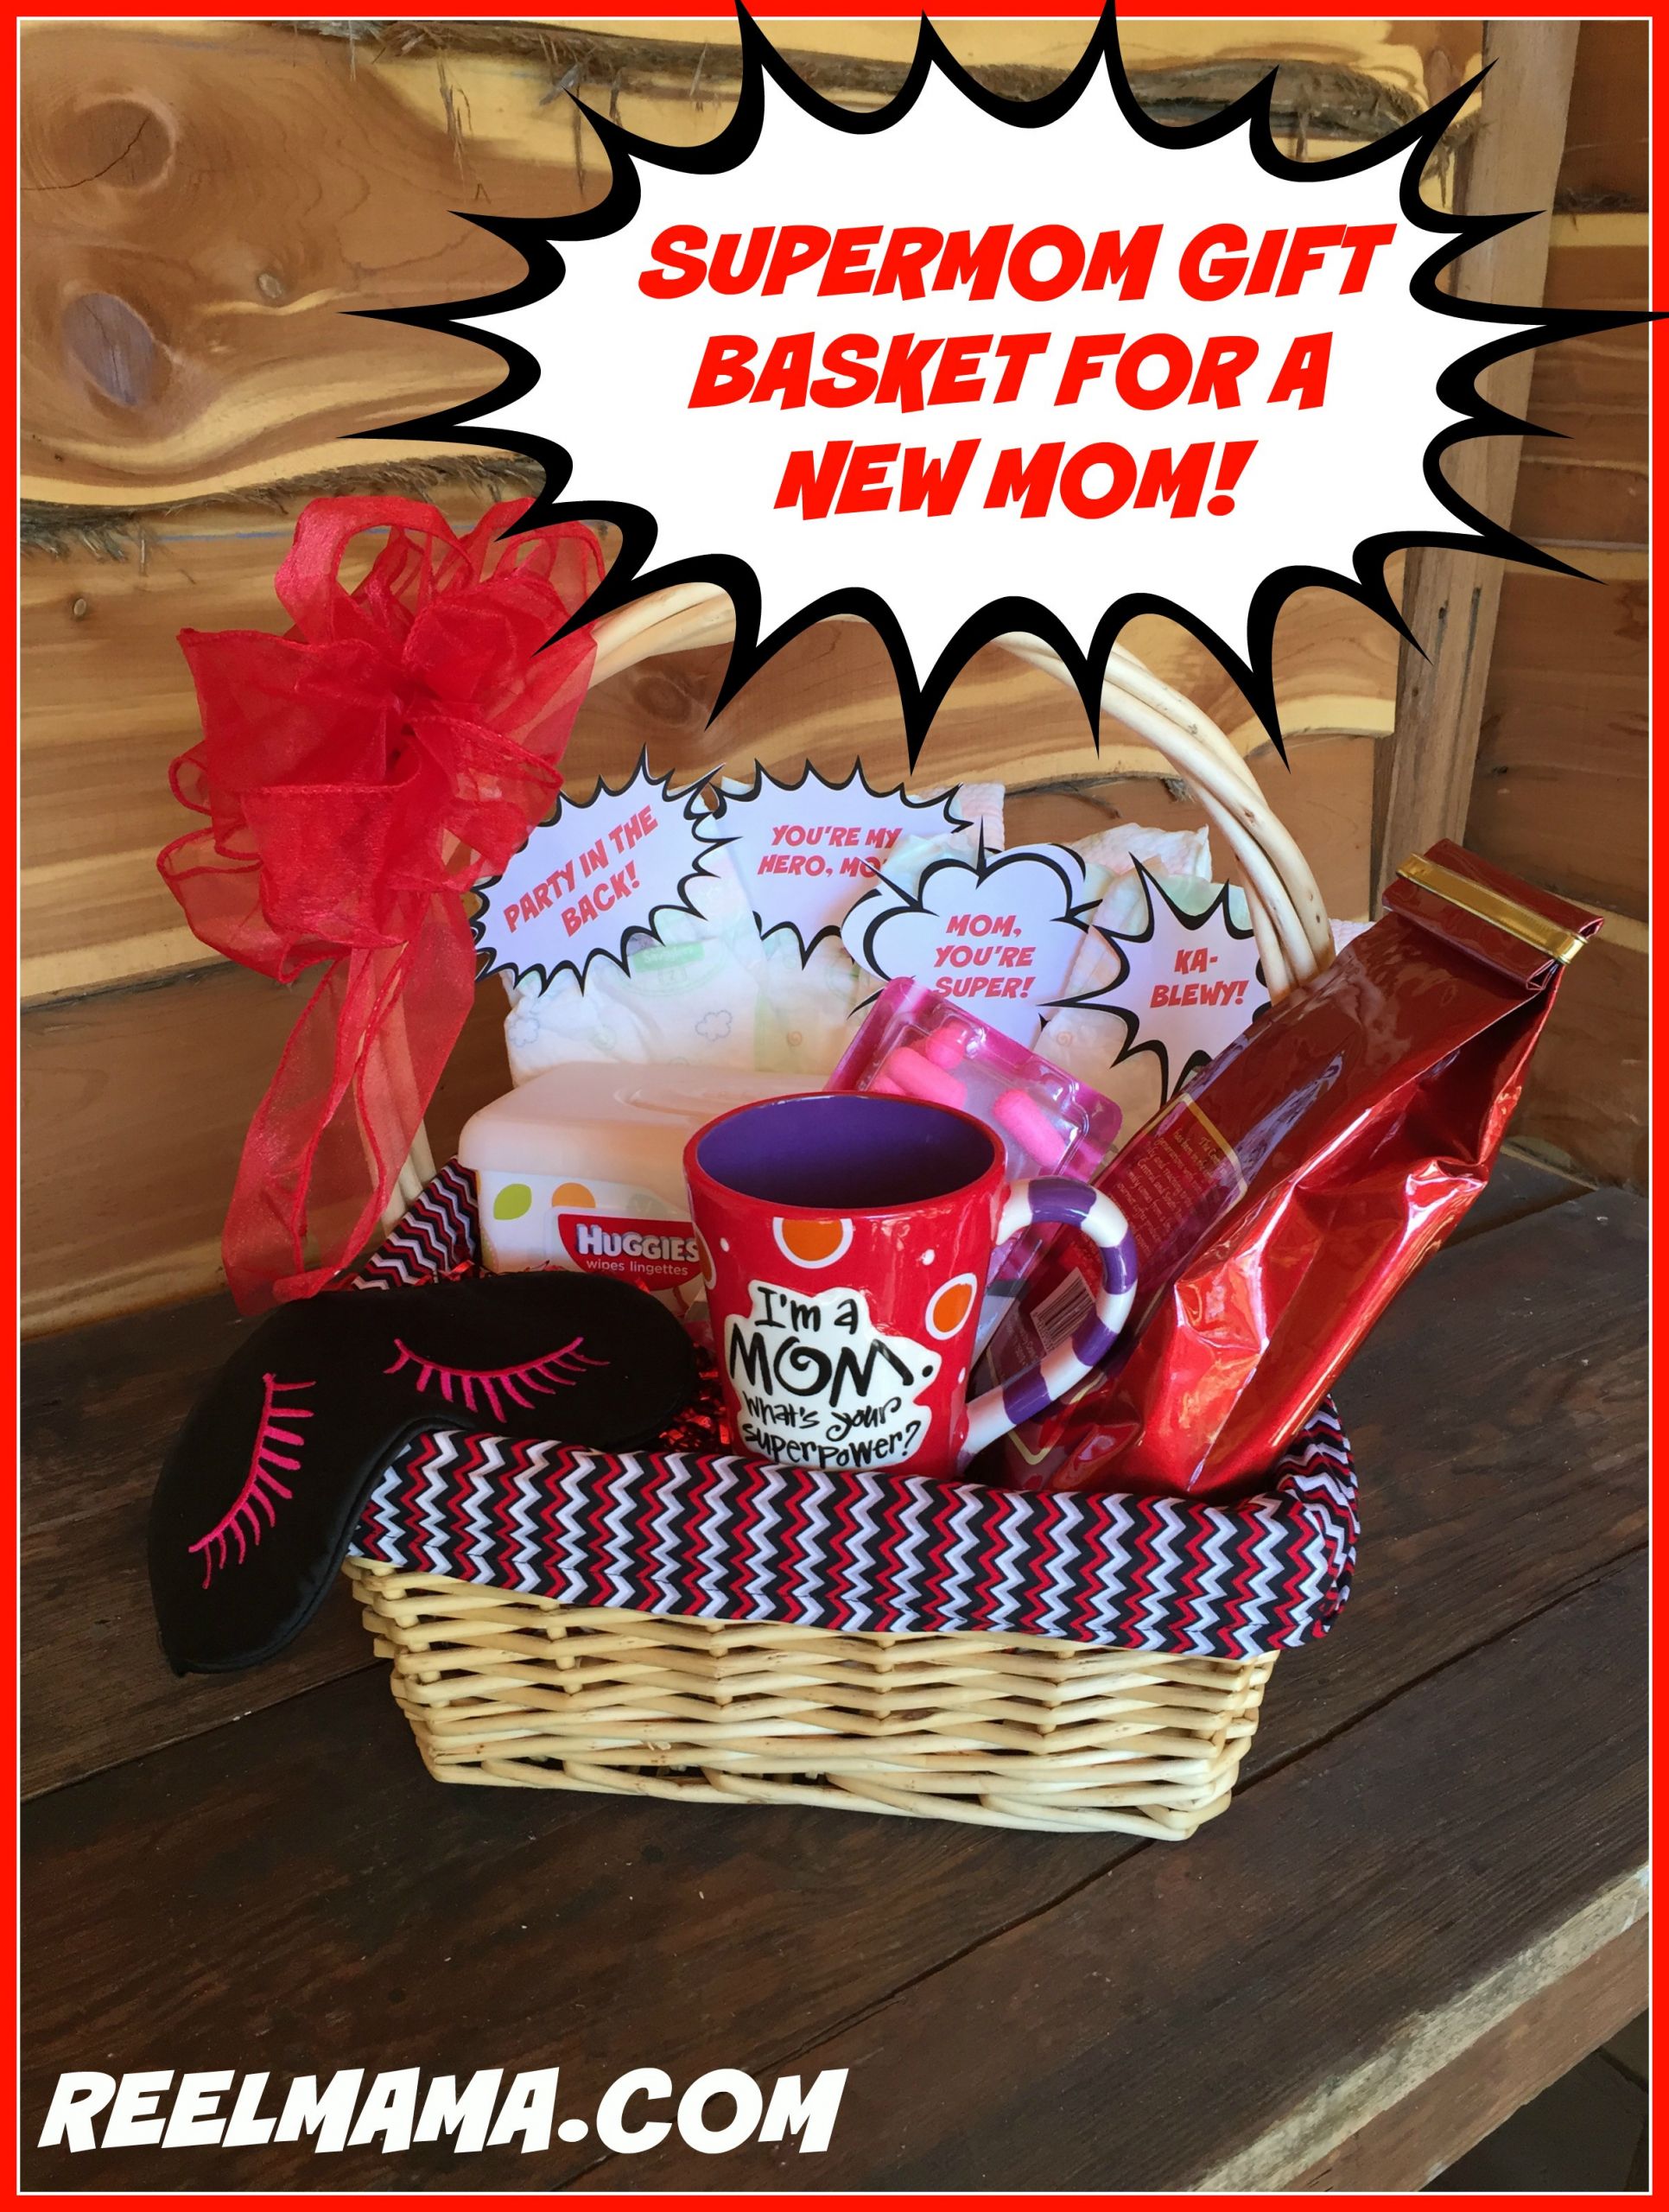 Gift Basket Ideas New Moms
 Supermom t basket for a new mom Reelmama